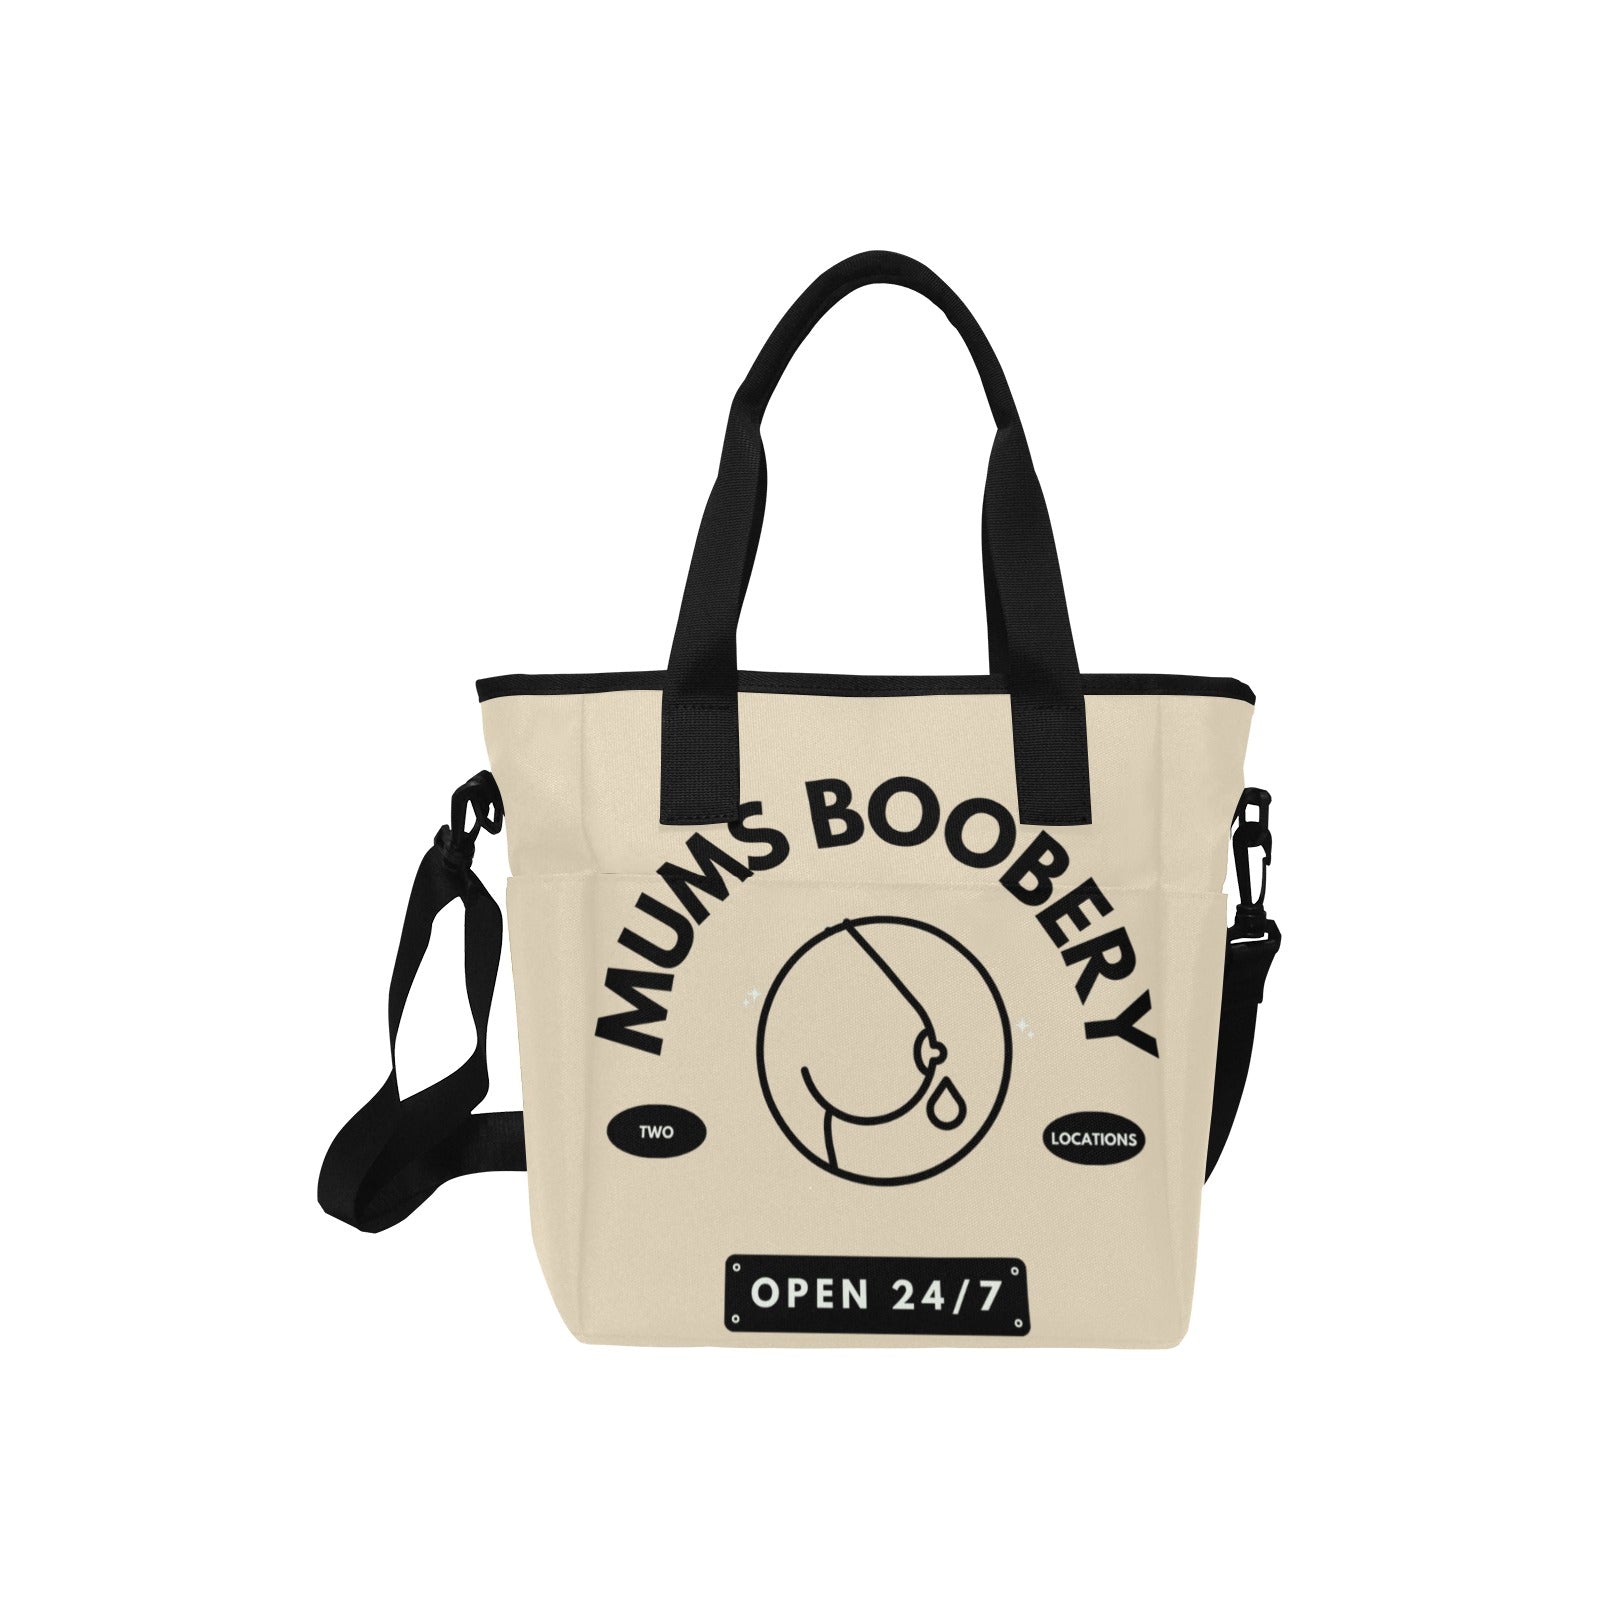 Mums Boobery - Insulated Lunch Bag for Breast Milk Storage